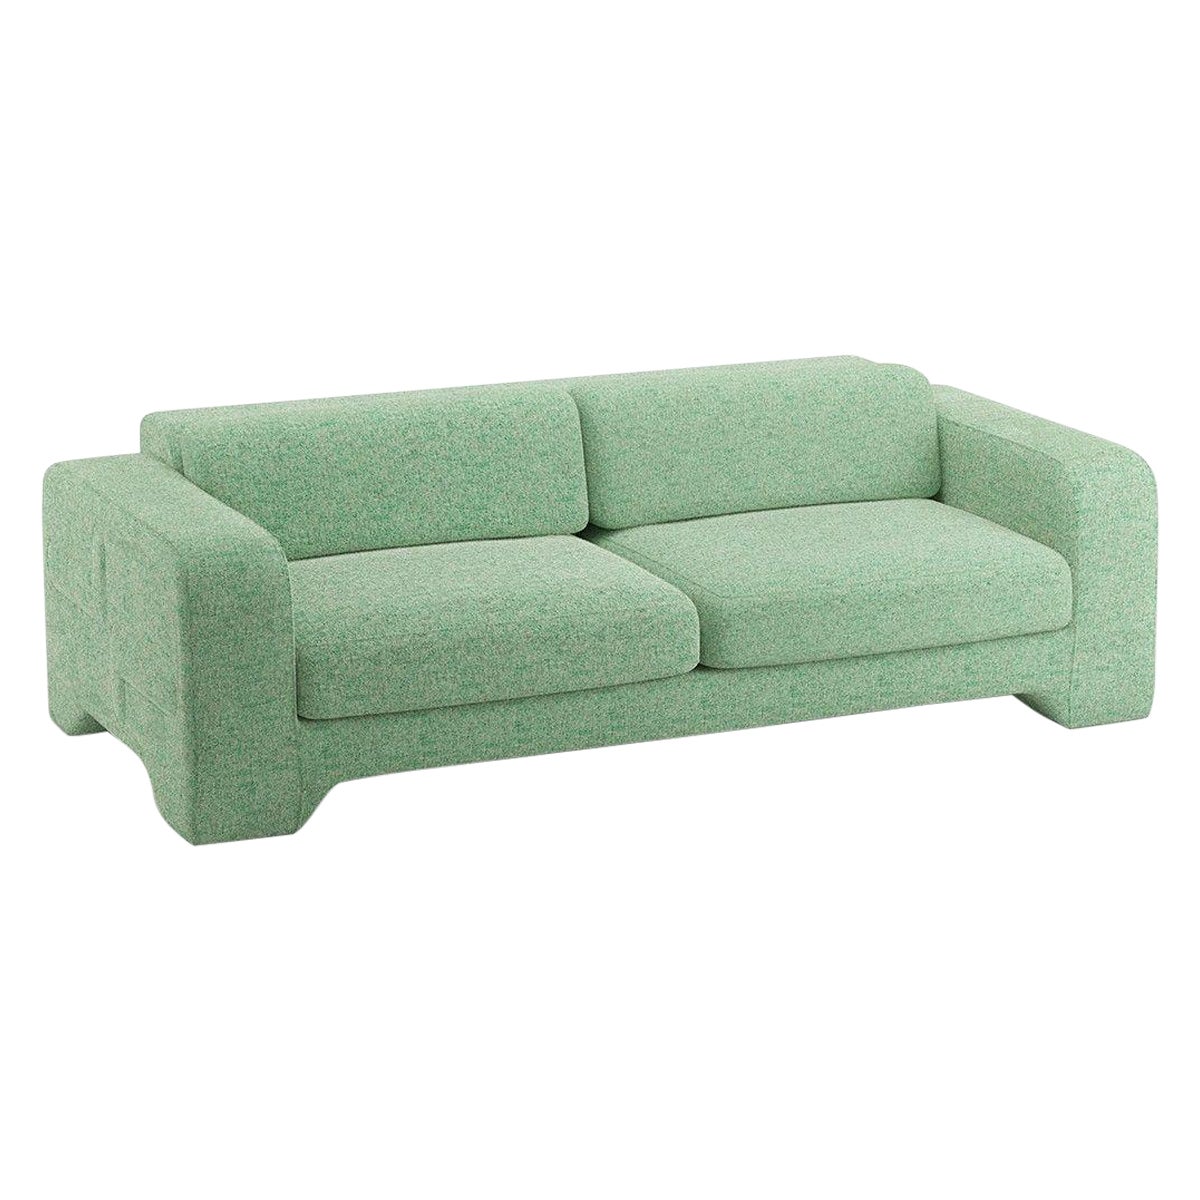 Popus Editions Giovanna 3 Seater Sofa in Emerald London Linen Fabric For Sale